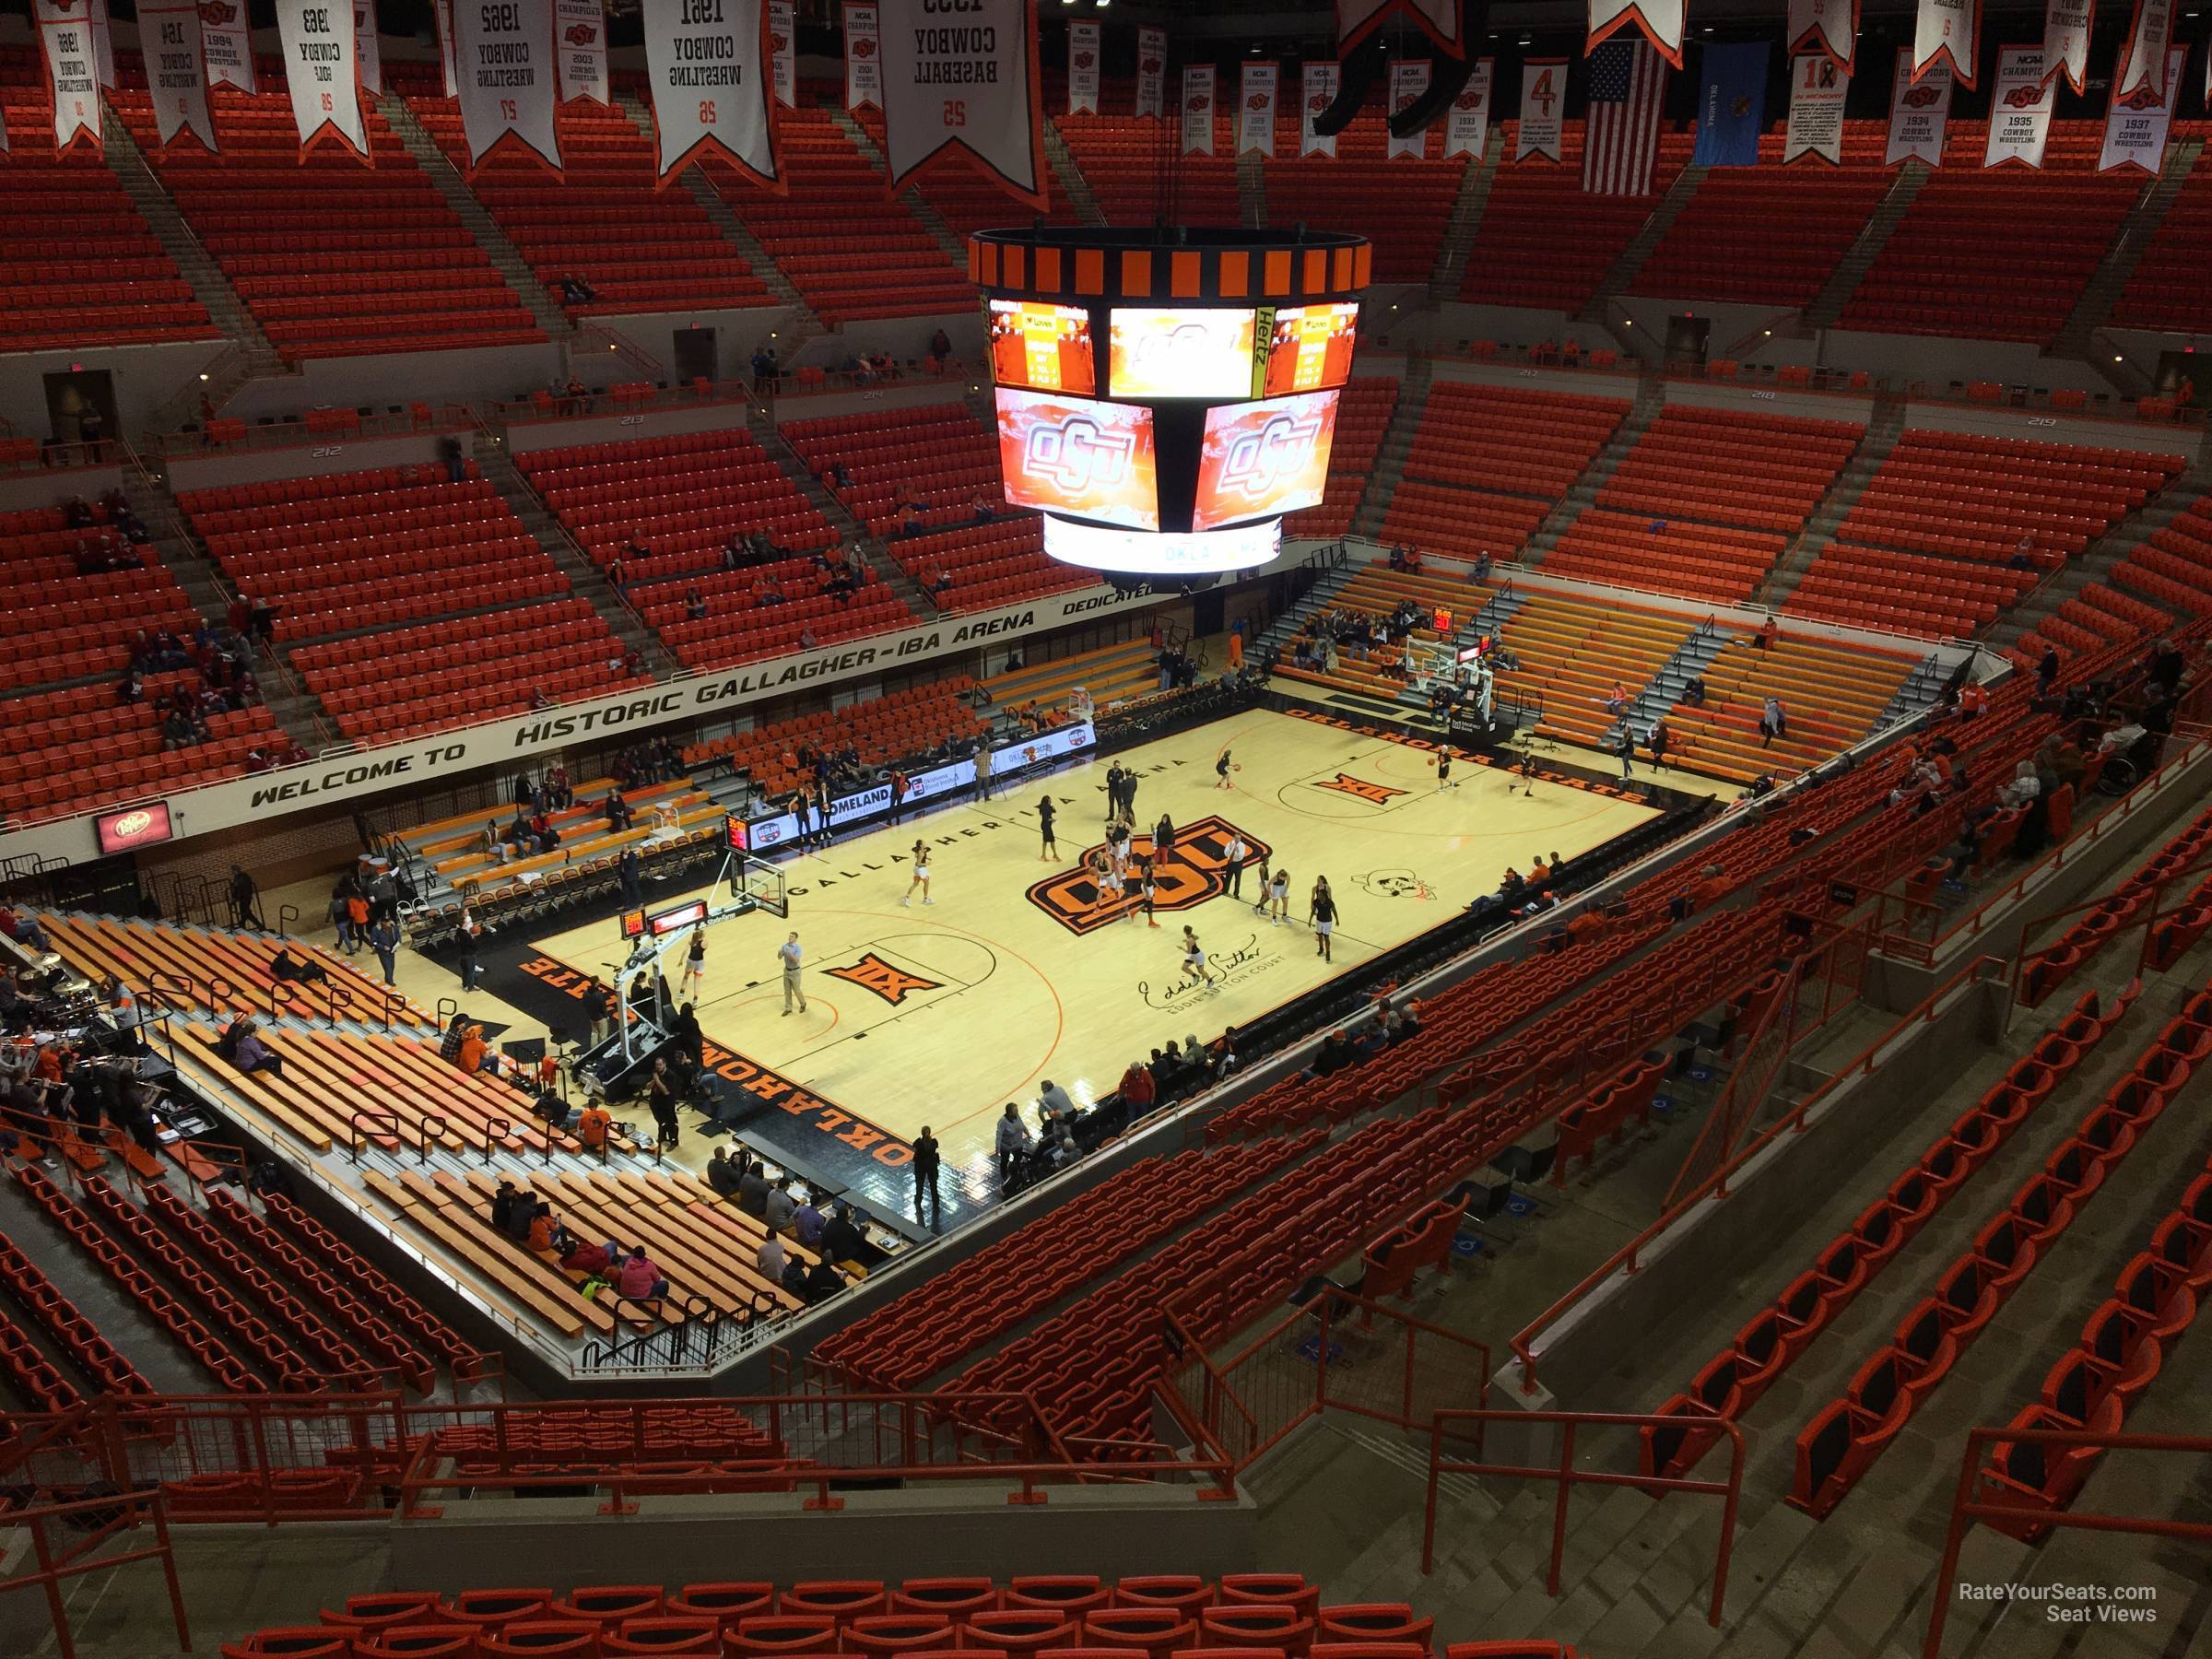 section 307, row 10 seat view  - gallagher-iba arena